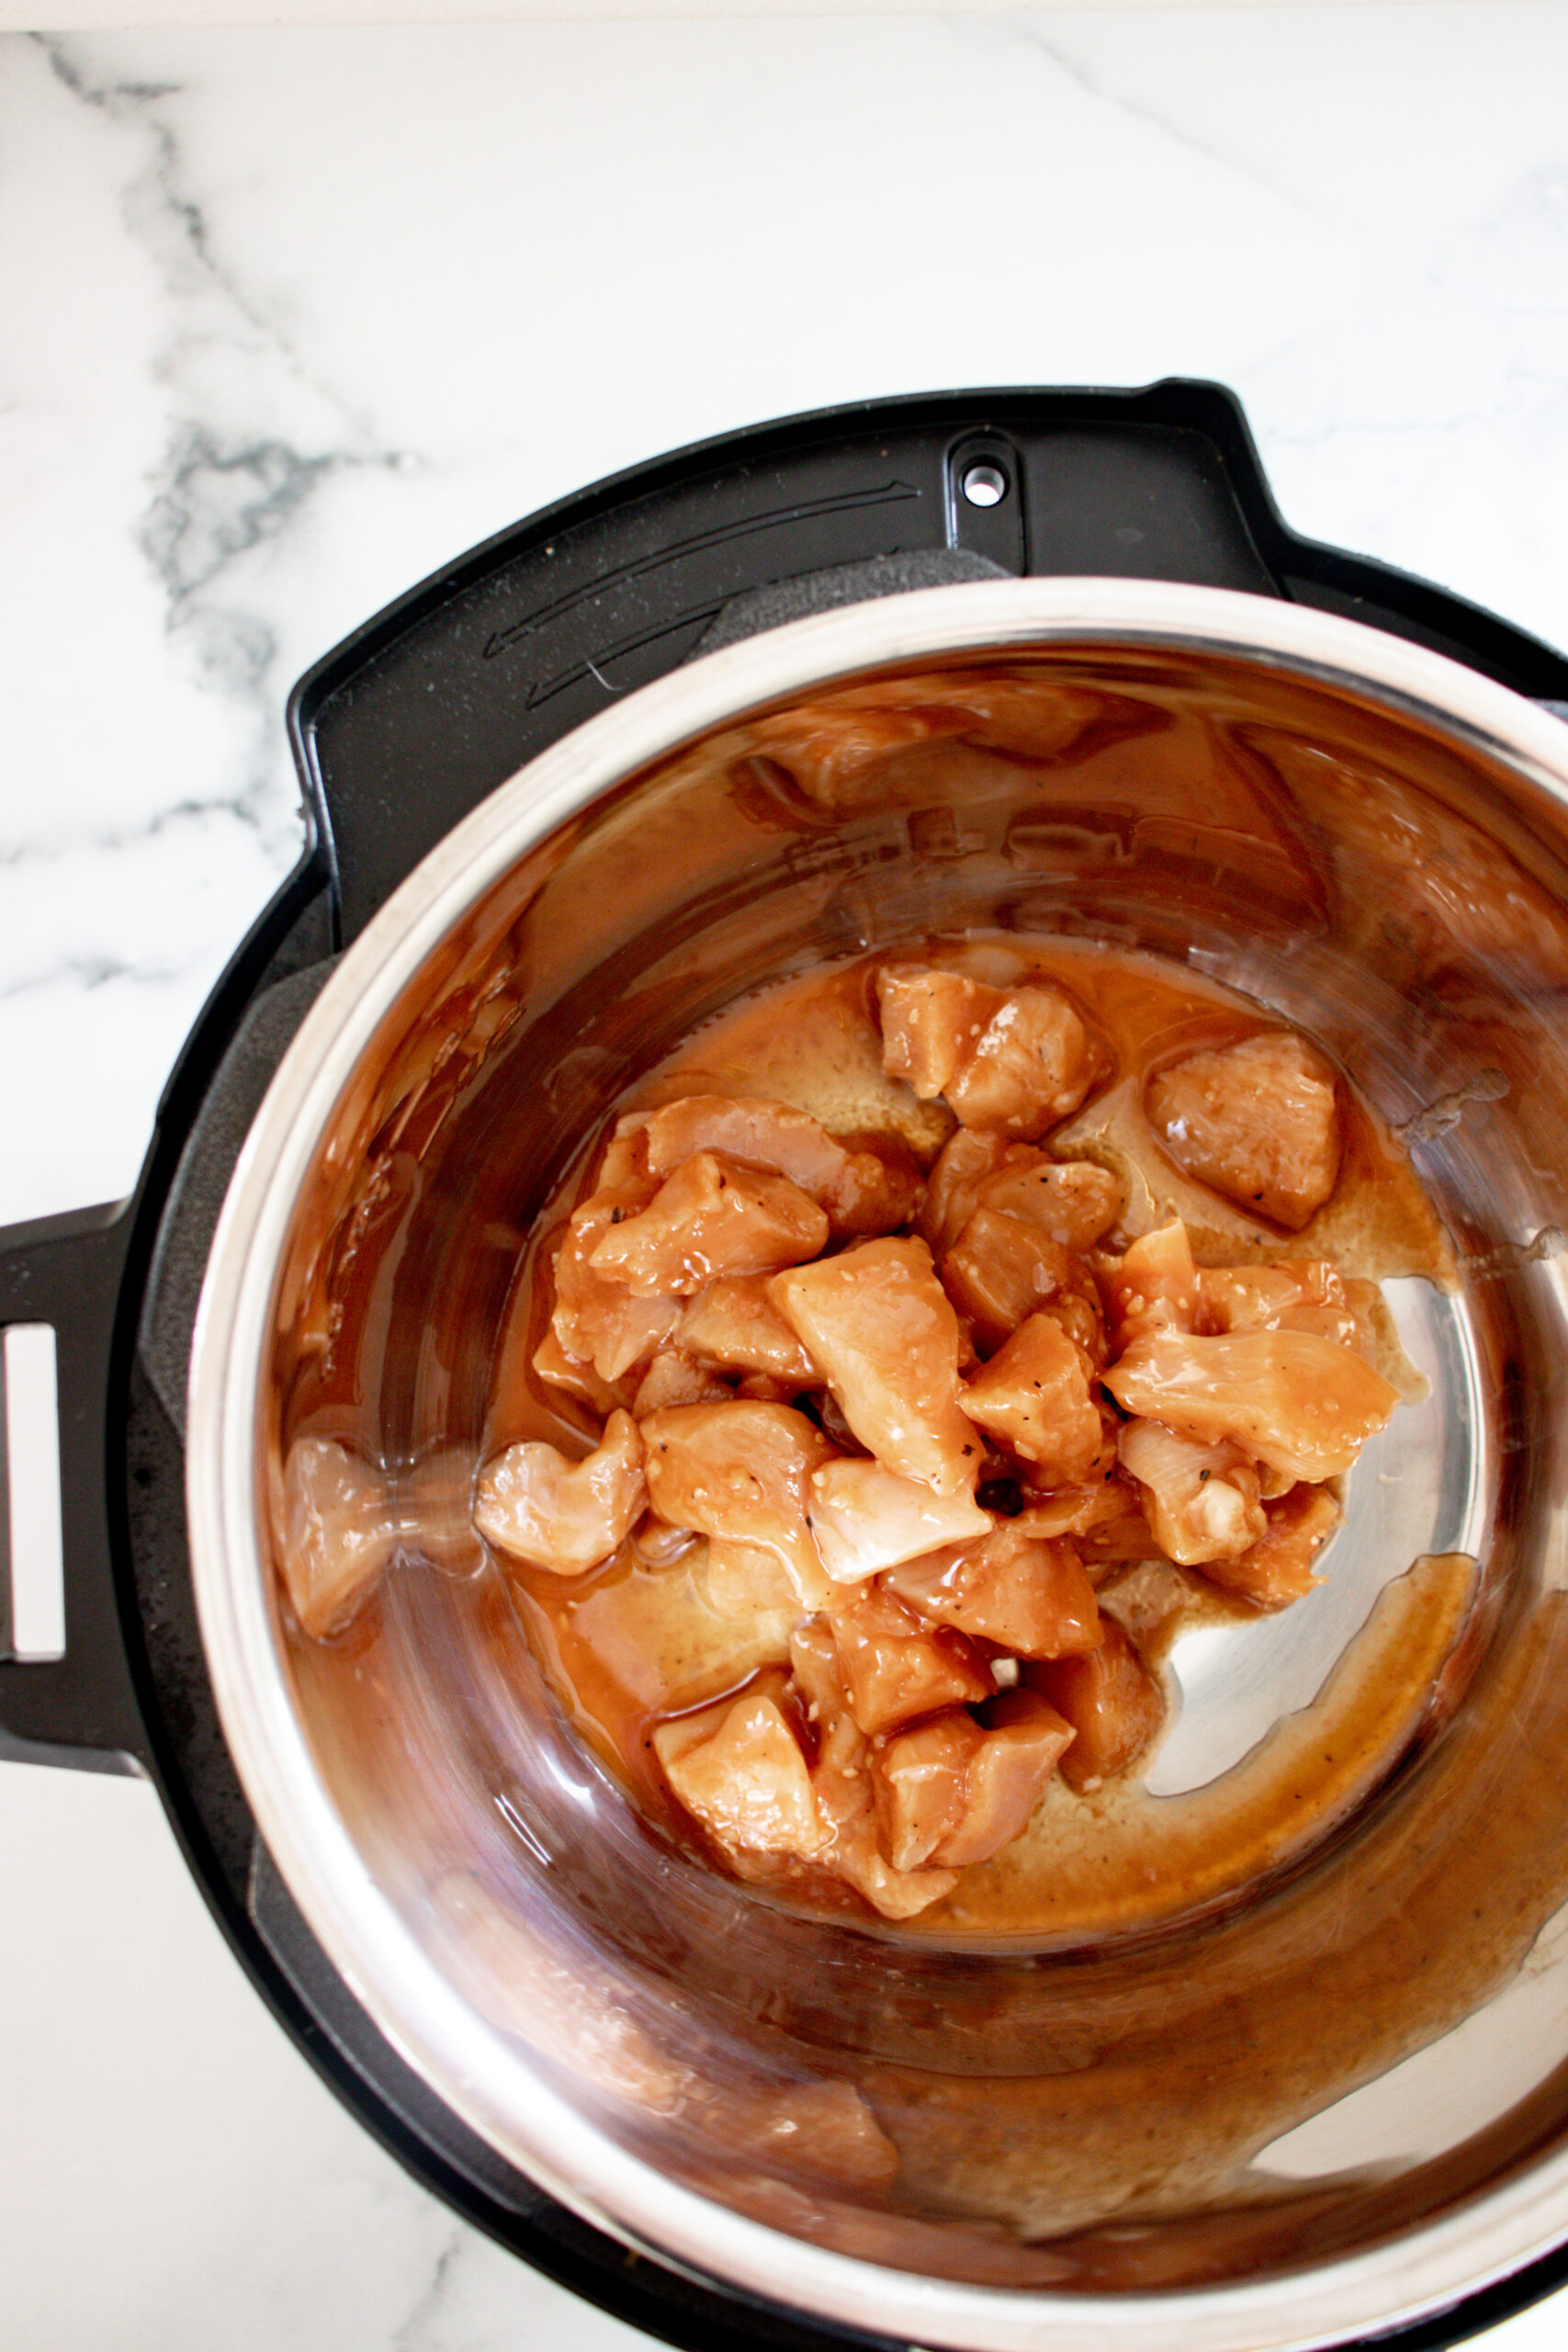 An Instant Pot with raw chicken and sauce in it.